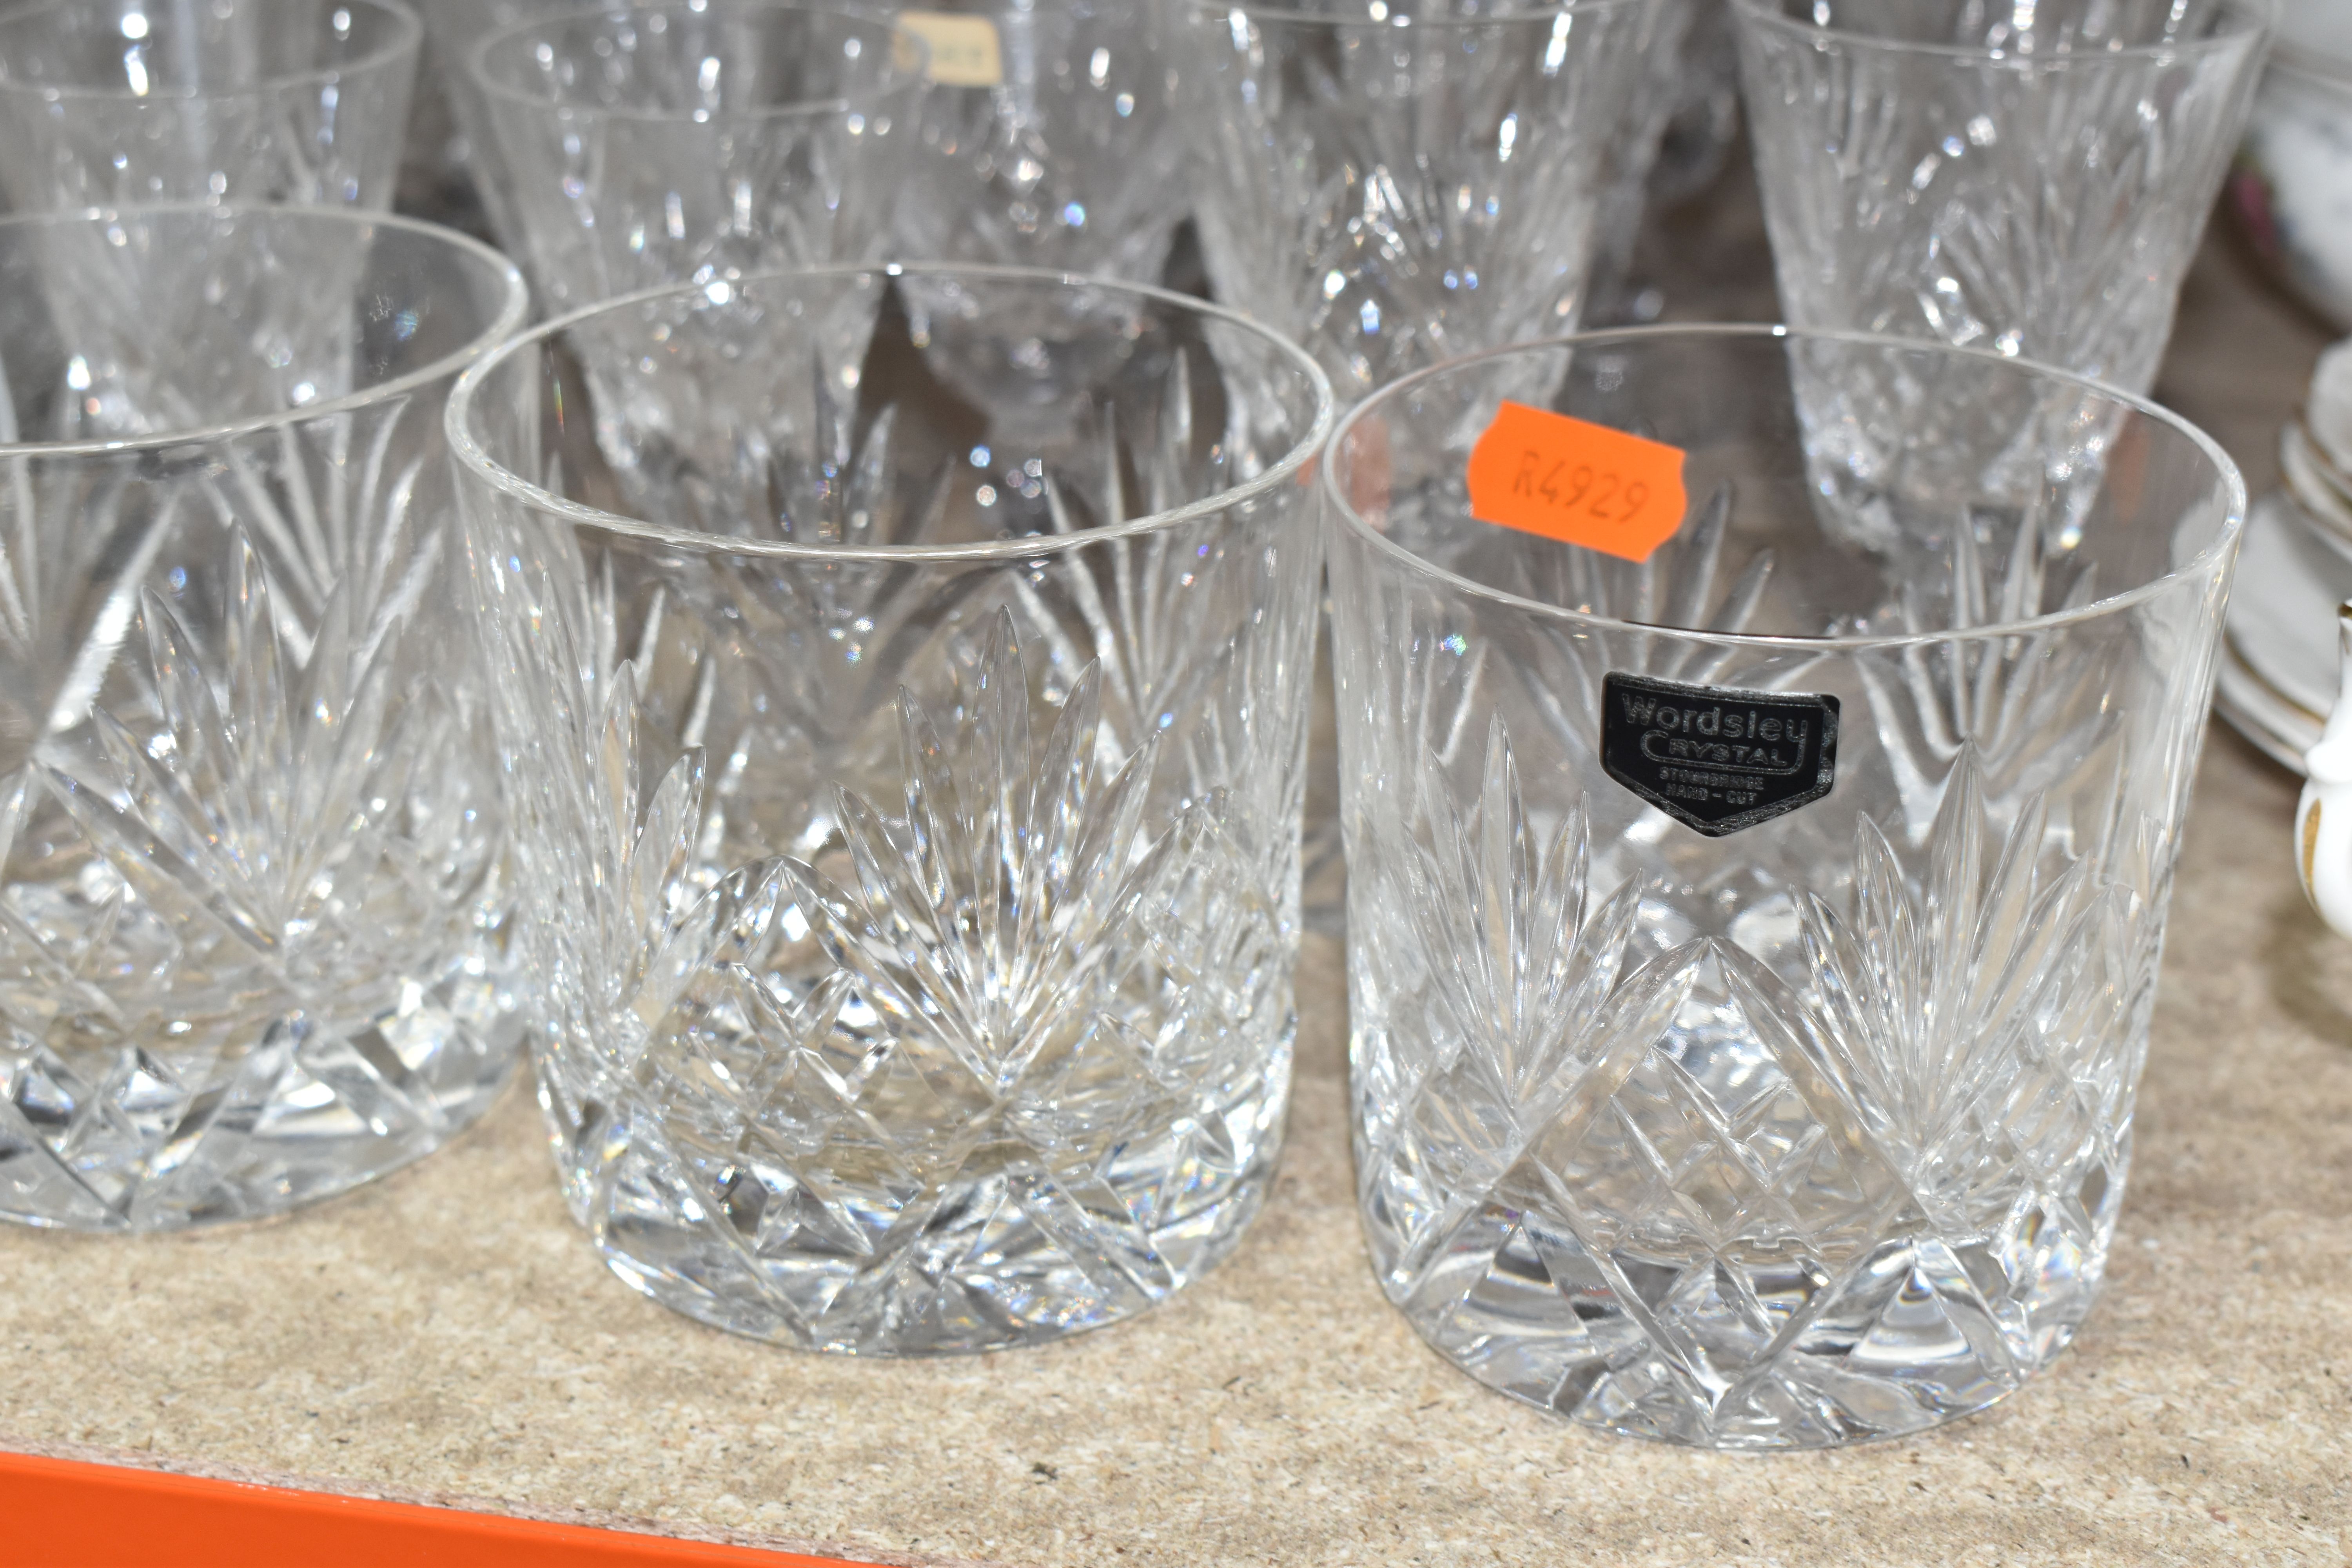 A LARGE COLLECTION OF WORDSLEY AND ROYAL DOULTON CRYSTAL CUT GLASSWARE ETC, including whisky - Image 2 of 10